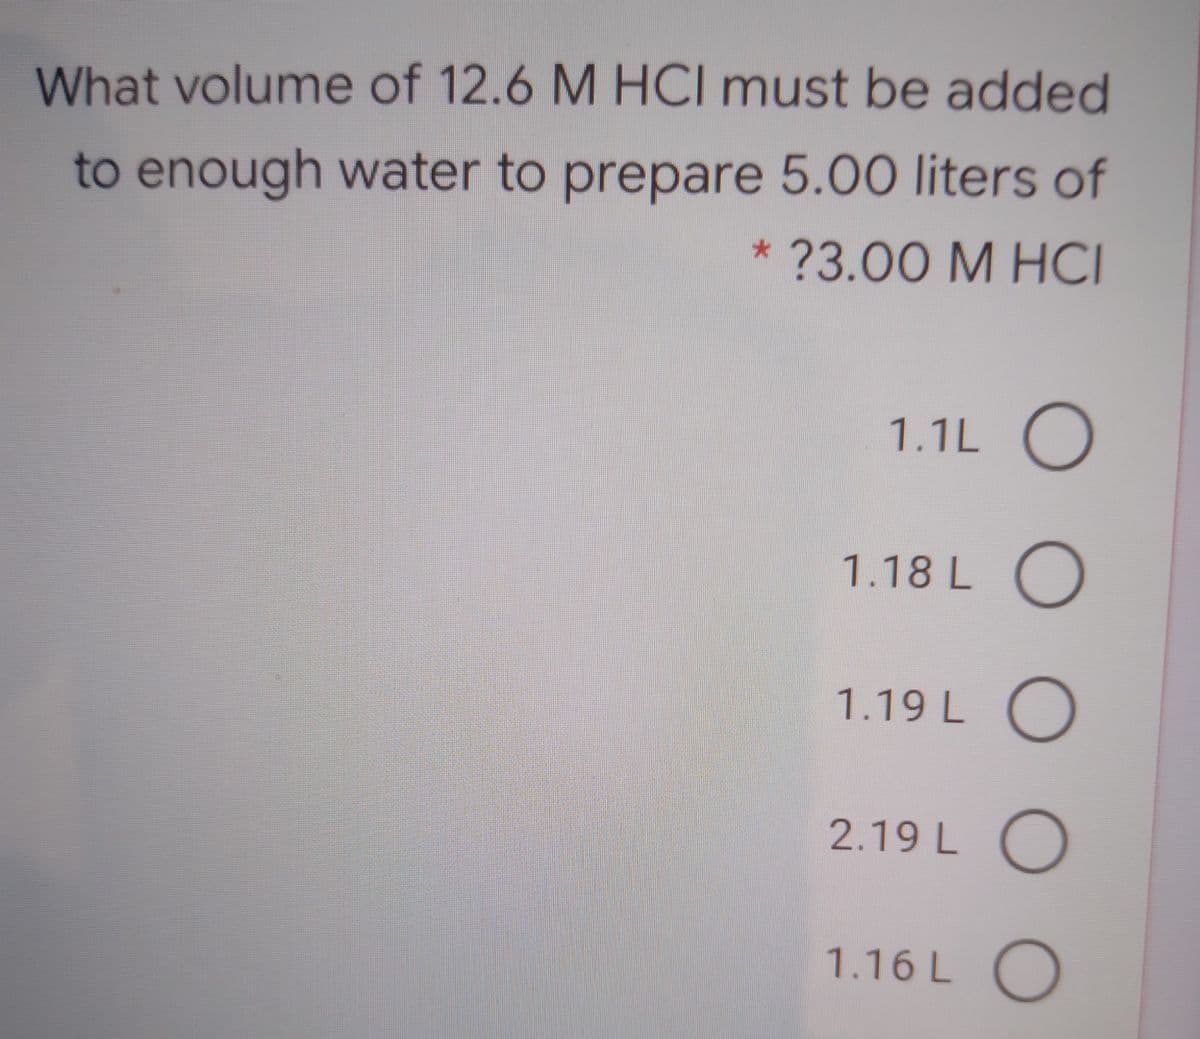 What volume of 12.6 M HCI must be added
to enough water to prepare 5.00 liter of
* ?3.00 M HCI
1.1L O
1.18 L O
1.19 L O
2.19 L O
1.16 L O
O O
